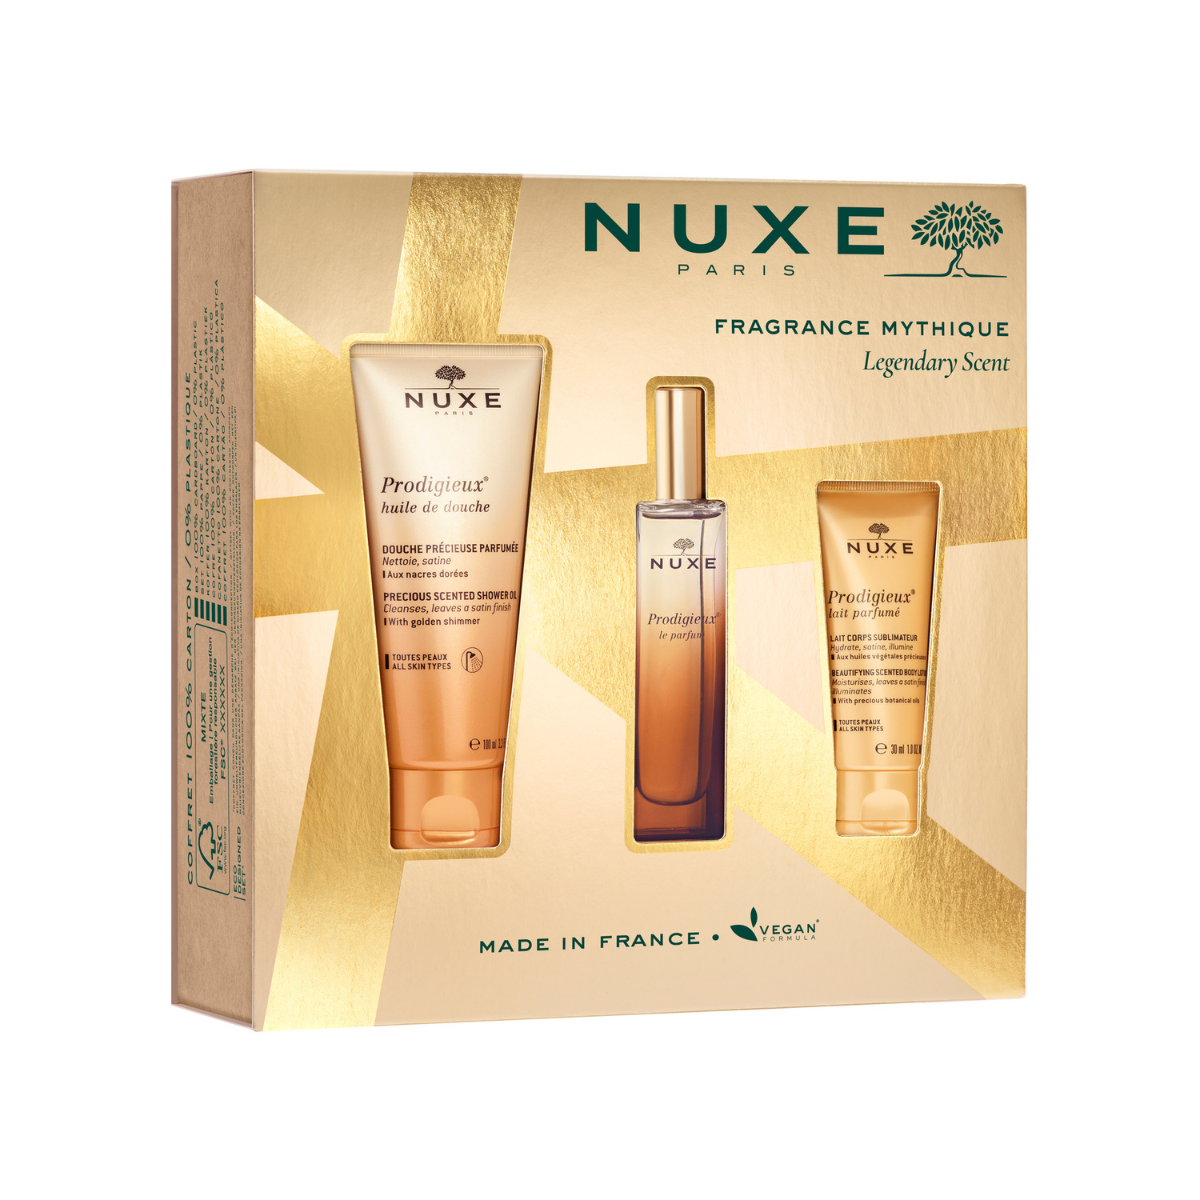 NUXE Legendary Scent Gift Set